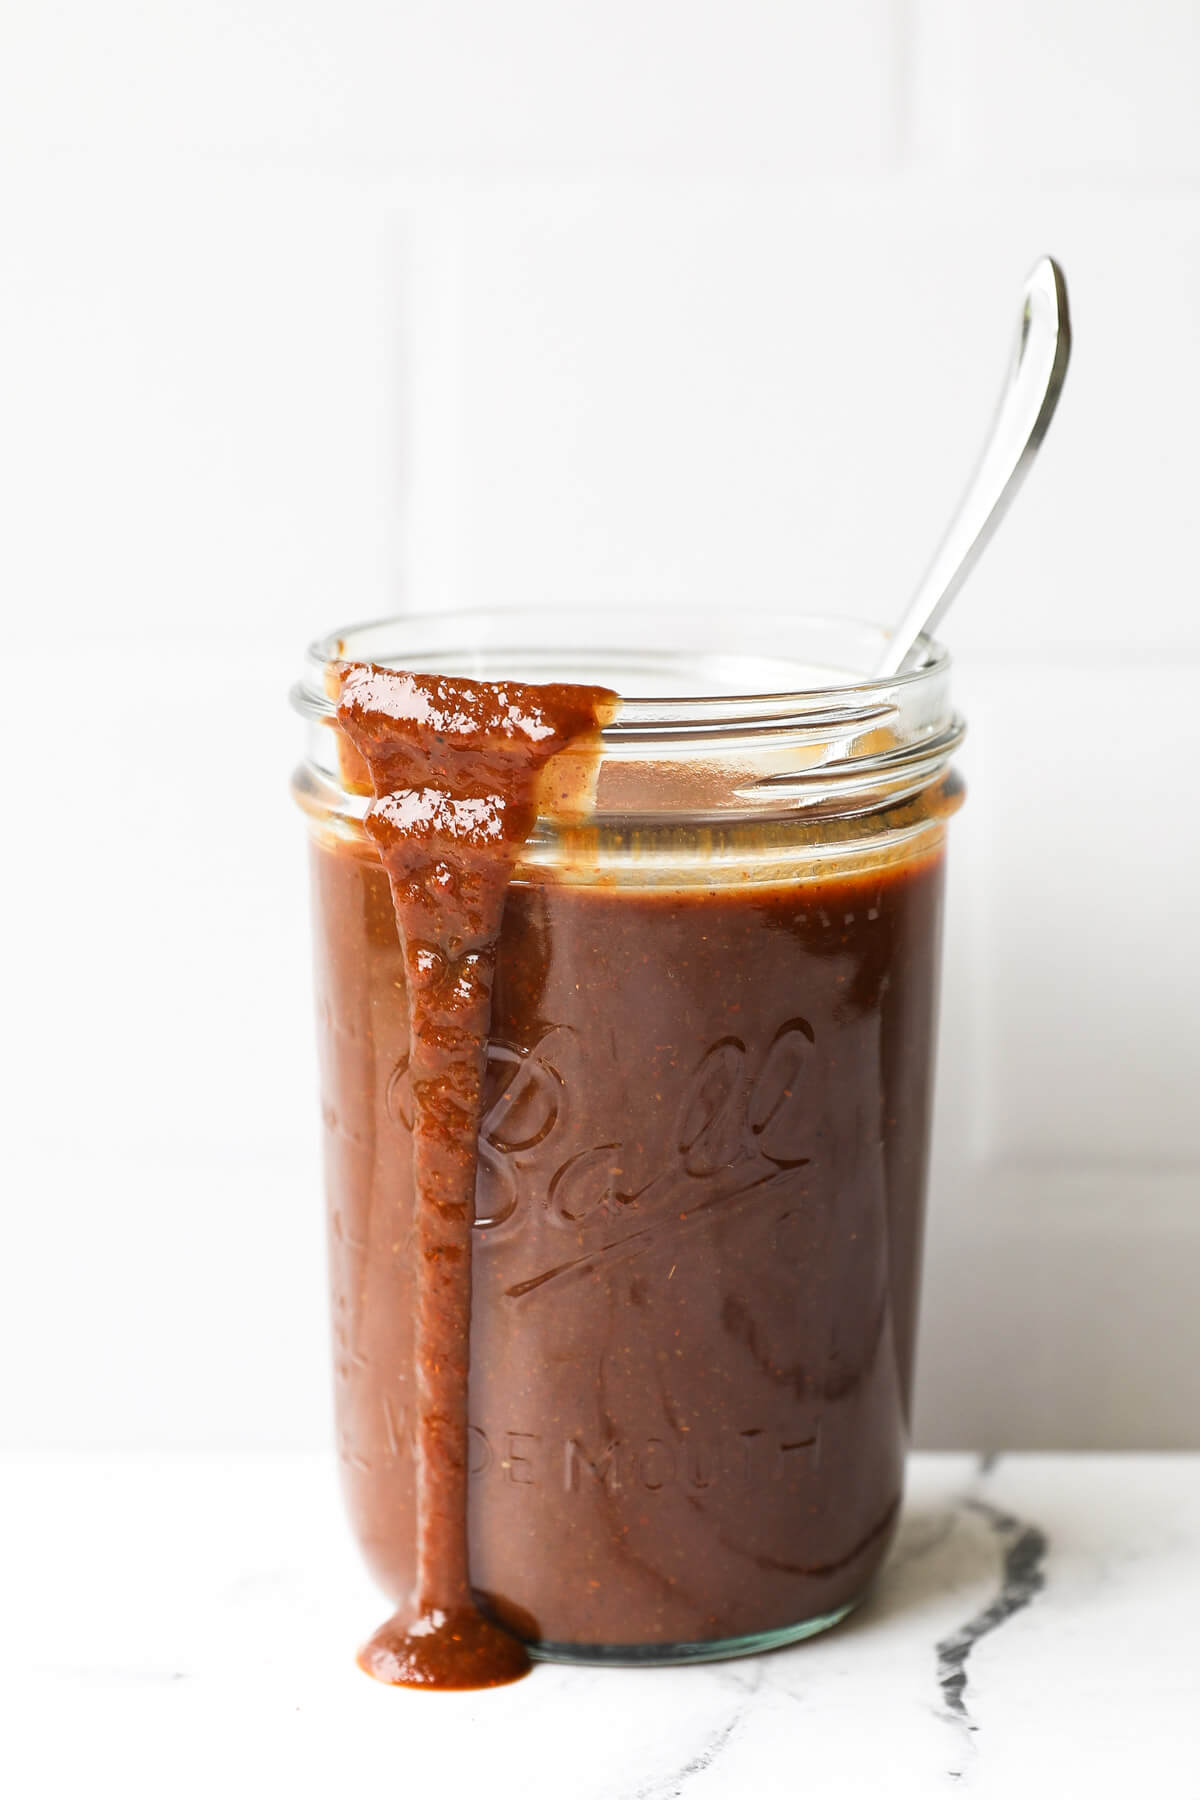 Healthy homemade whole30 BBQ sauce in a jar with spoon and sauce running down front of jar